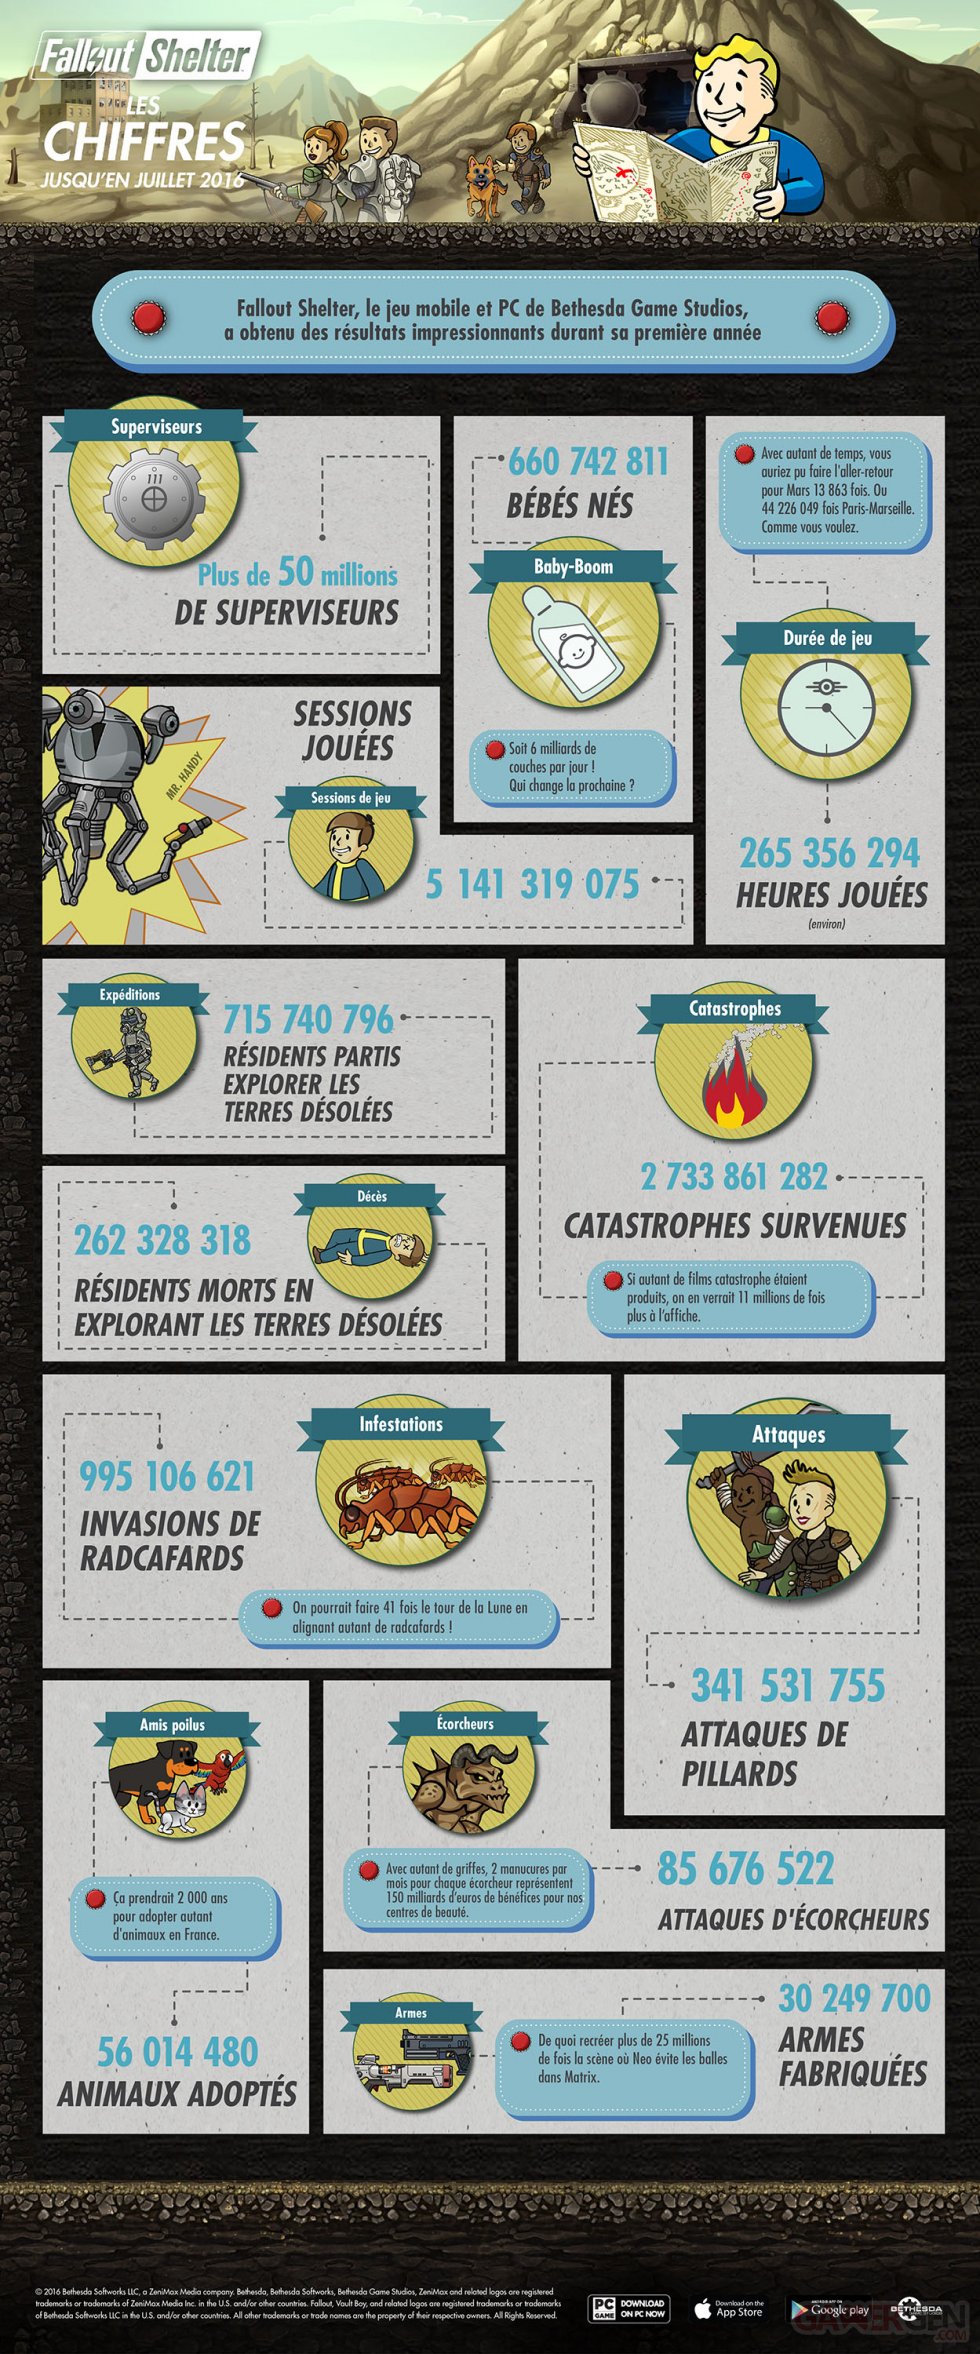 FalloutShelter_Infographic_071316_FR_3